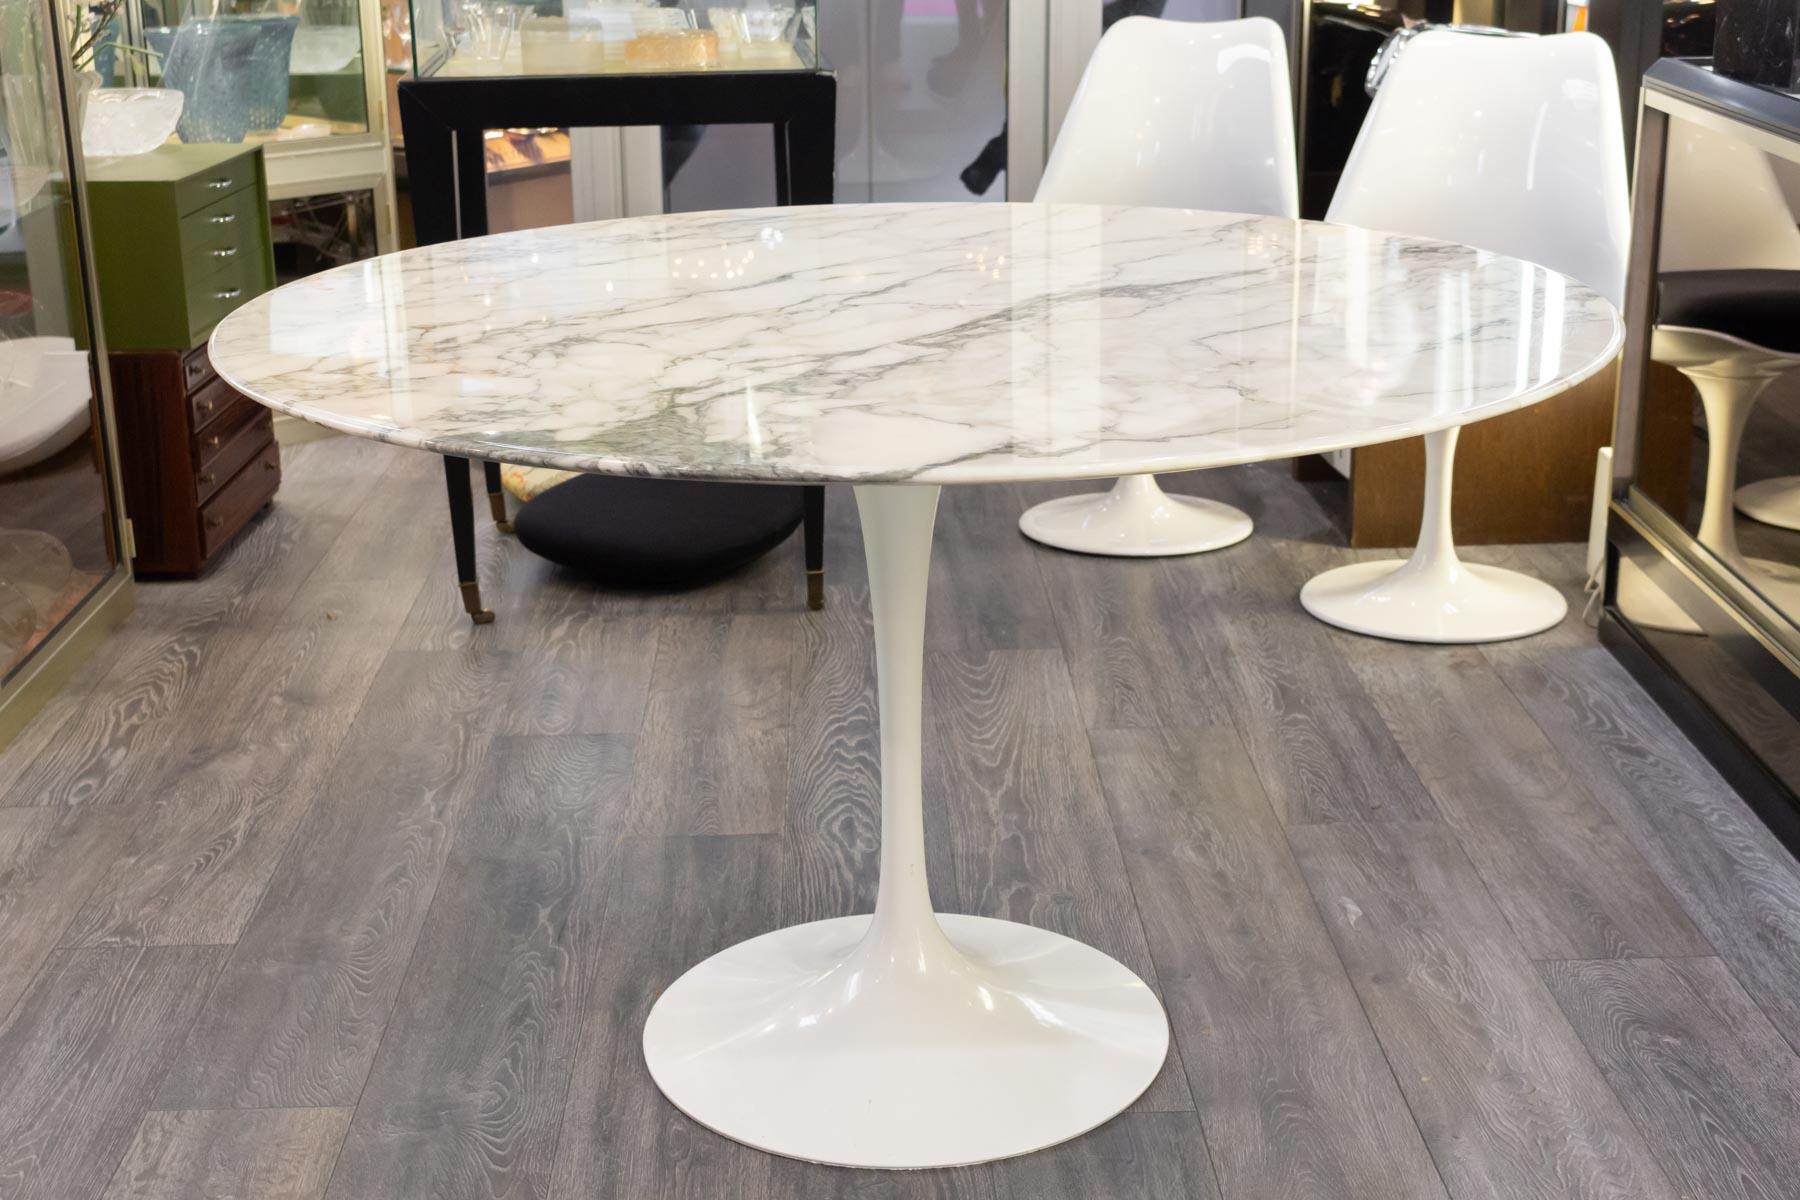 Eero Saarinen (1910-1961) & Knoll International
Tulip, modèle created, 1956.
Round table, Rilsan sheathed cast aluminum base
Circular white marble-top 120 cm diameter chamfered on the underside of its perimeter
Table ronde, piètement en fonte